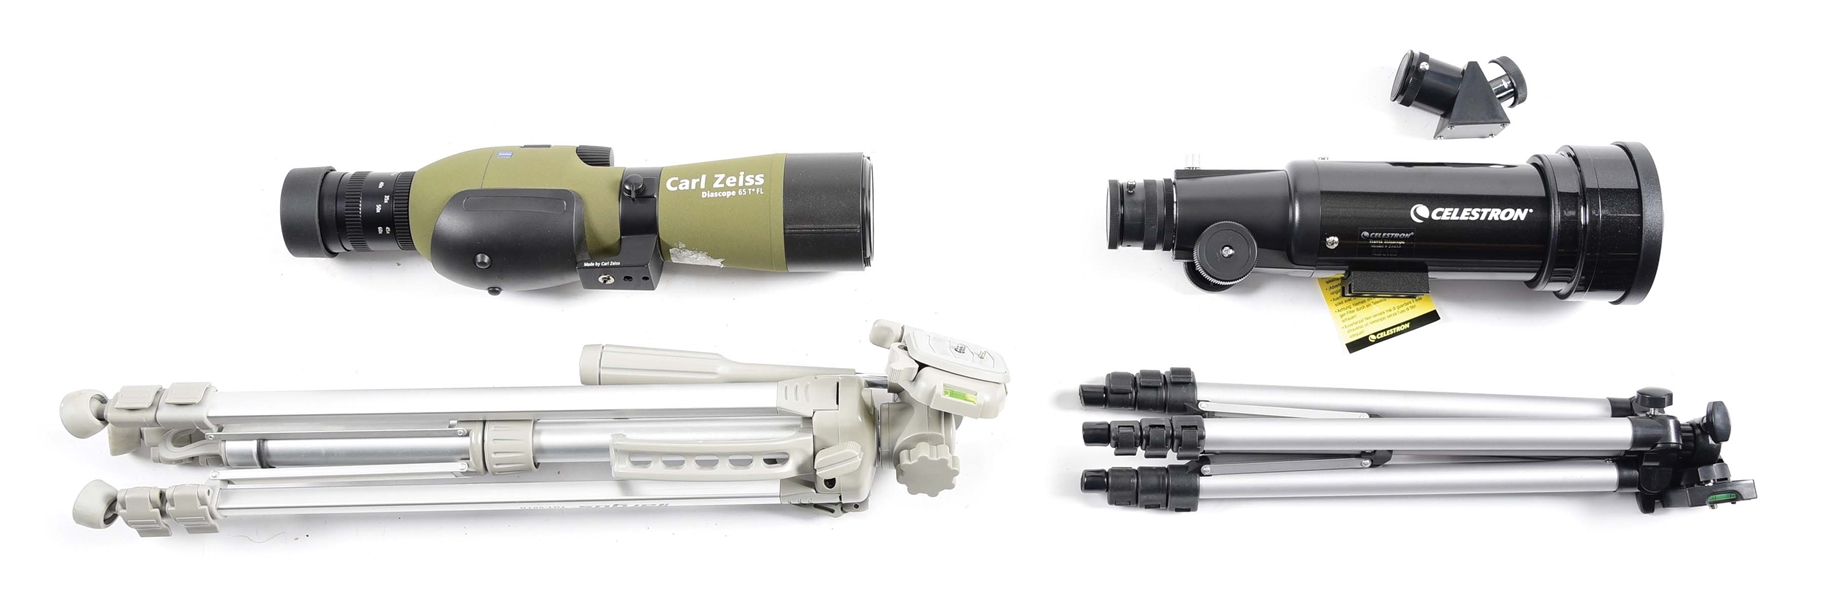 LOT OF 3: TARGUS CAMERA/CAMCORDER TRIPOD, ZEISS VICTORY SPOTTING SCOPE AND CELESTRON TRAVEL SCOPE 70.